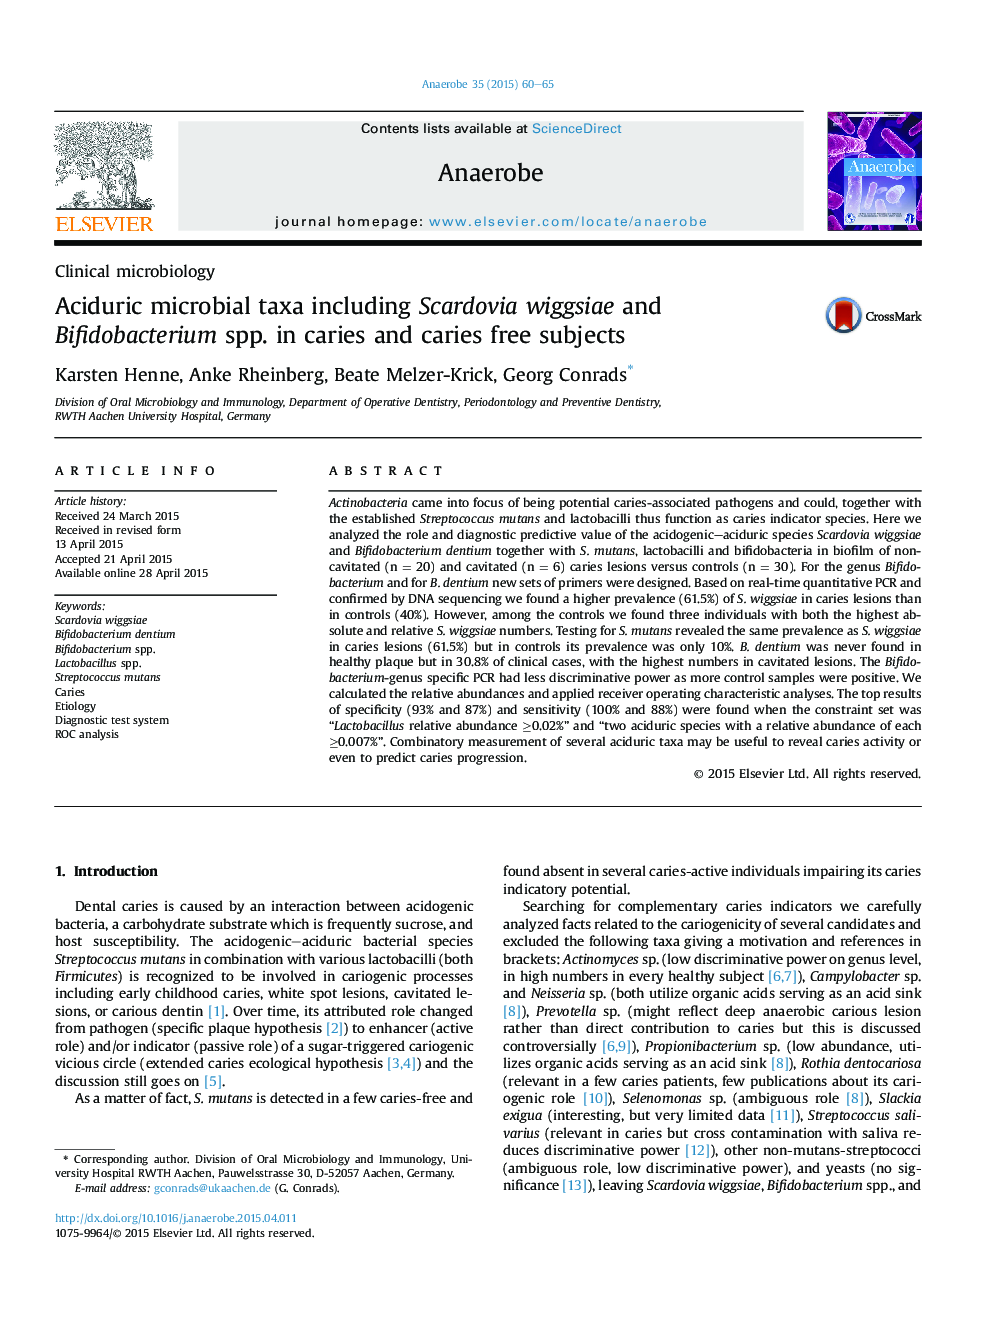 Aciduric microbial taxa including Scardovia wiggsiae and Bifidobacterium spp. in caries and caries free subjects